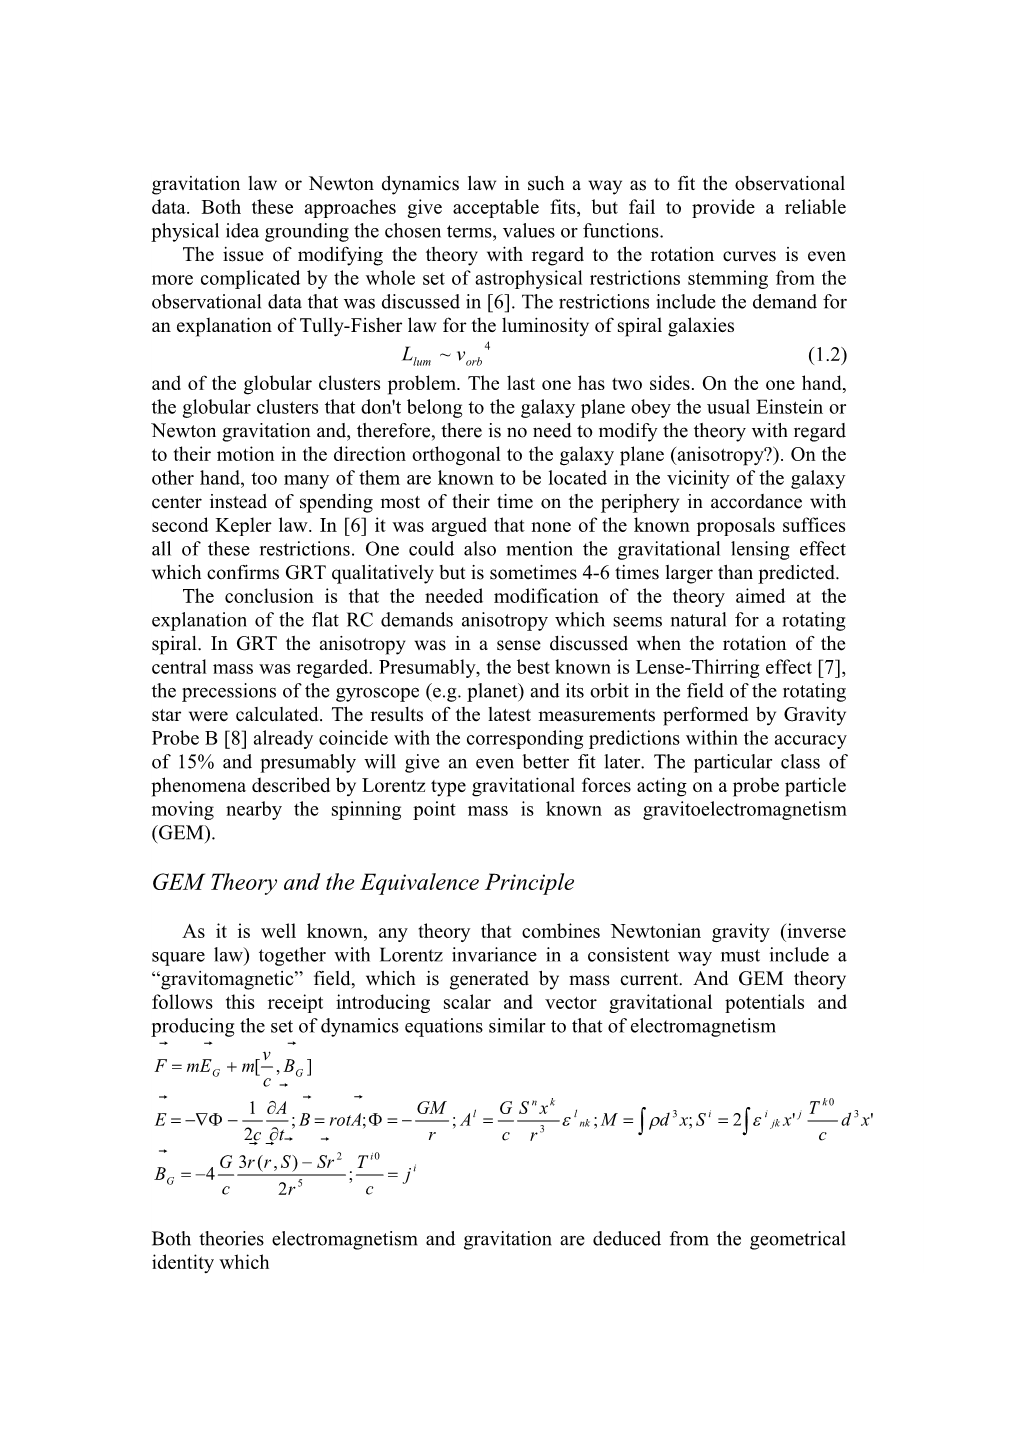 Anisotropic Geometrodynamics in Cosmological Problems